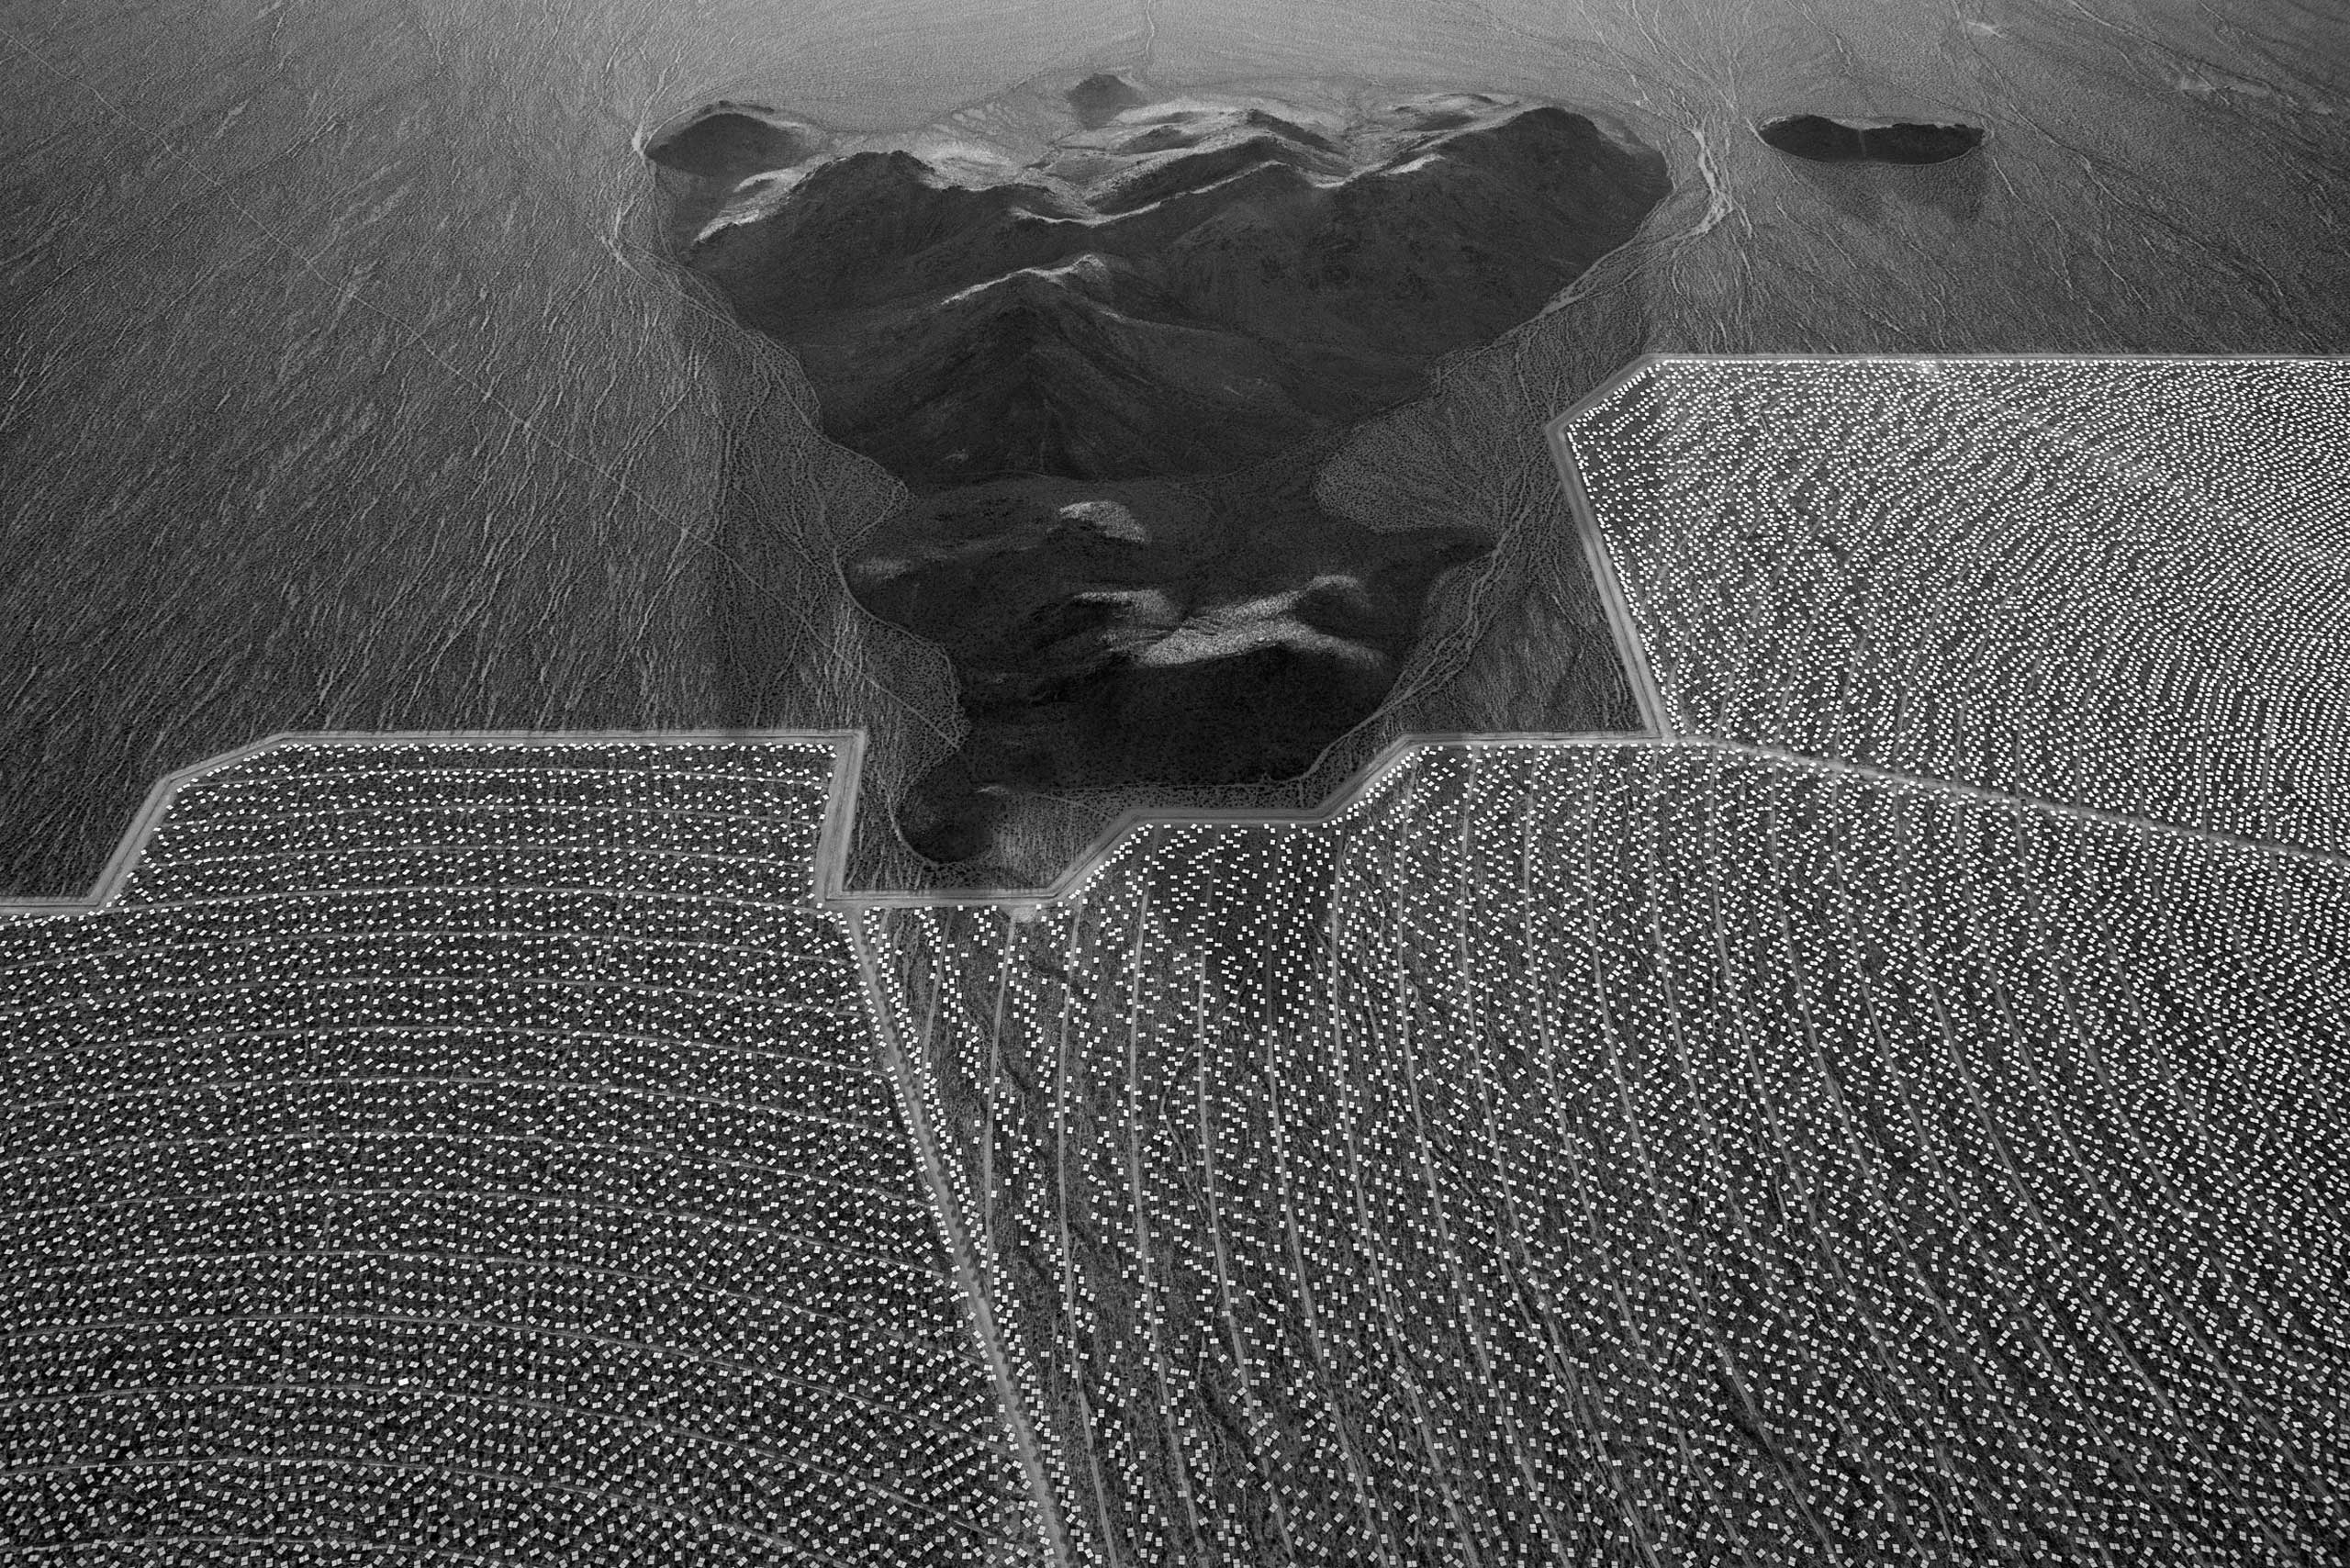 Mirrored heliostats dot the landscape at the Ivanpah solar plant in the Mojave Desert, California.